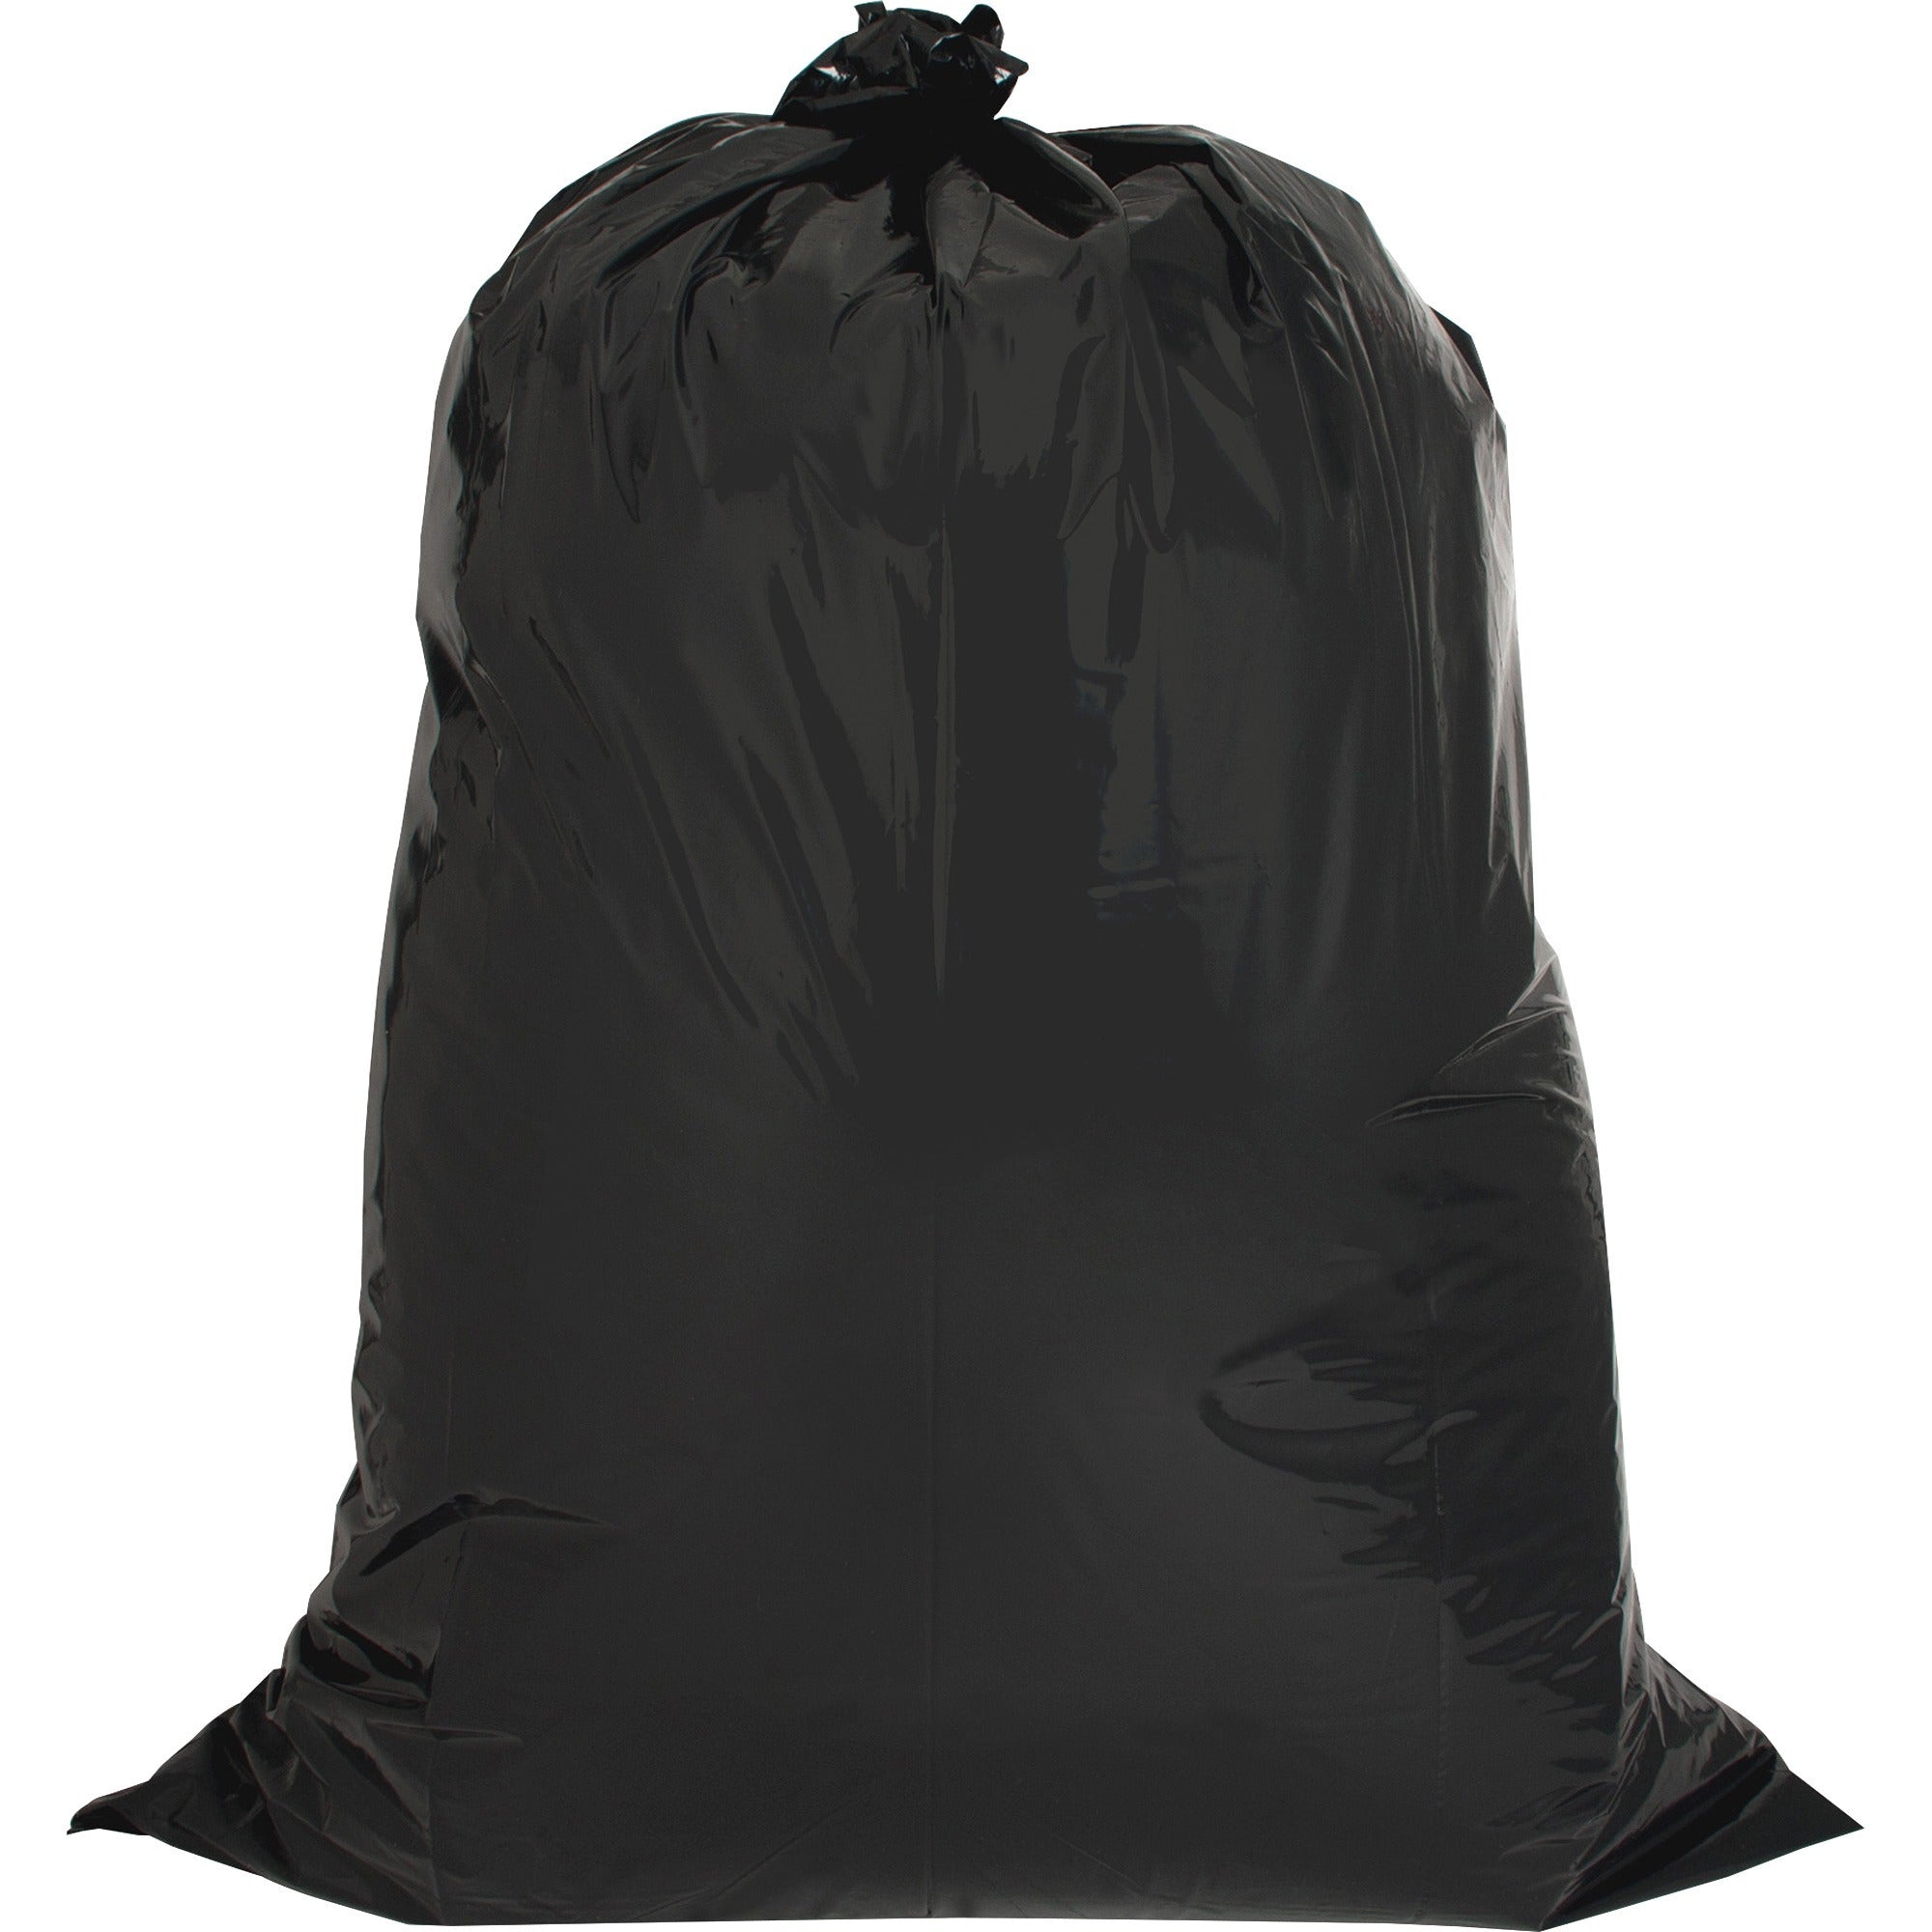 Genuine Joe Heavy Duty Contractor Bags - Large Size - 42 gal Capacity - 33" Width x 48" Length - 2.50 mil (63 Micron) Thickness - Low Density - Black - 20/Carton - Kitchen - 